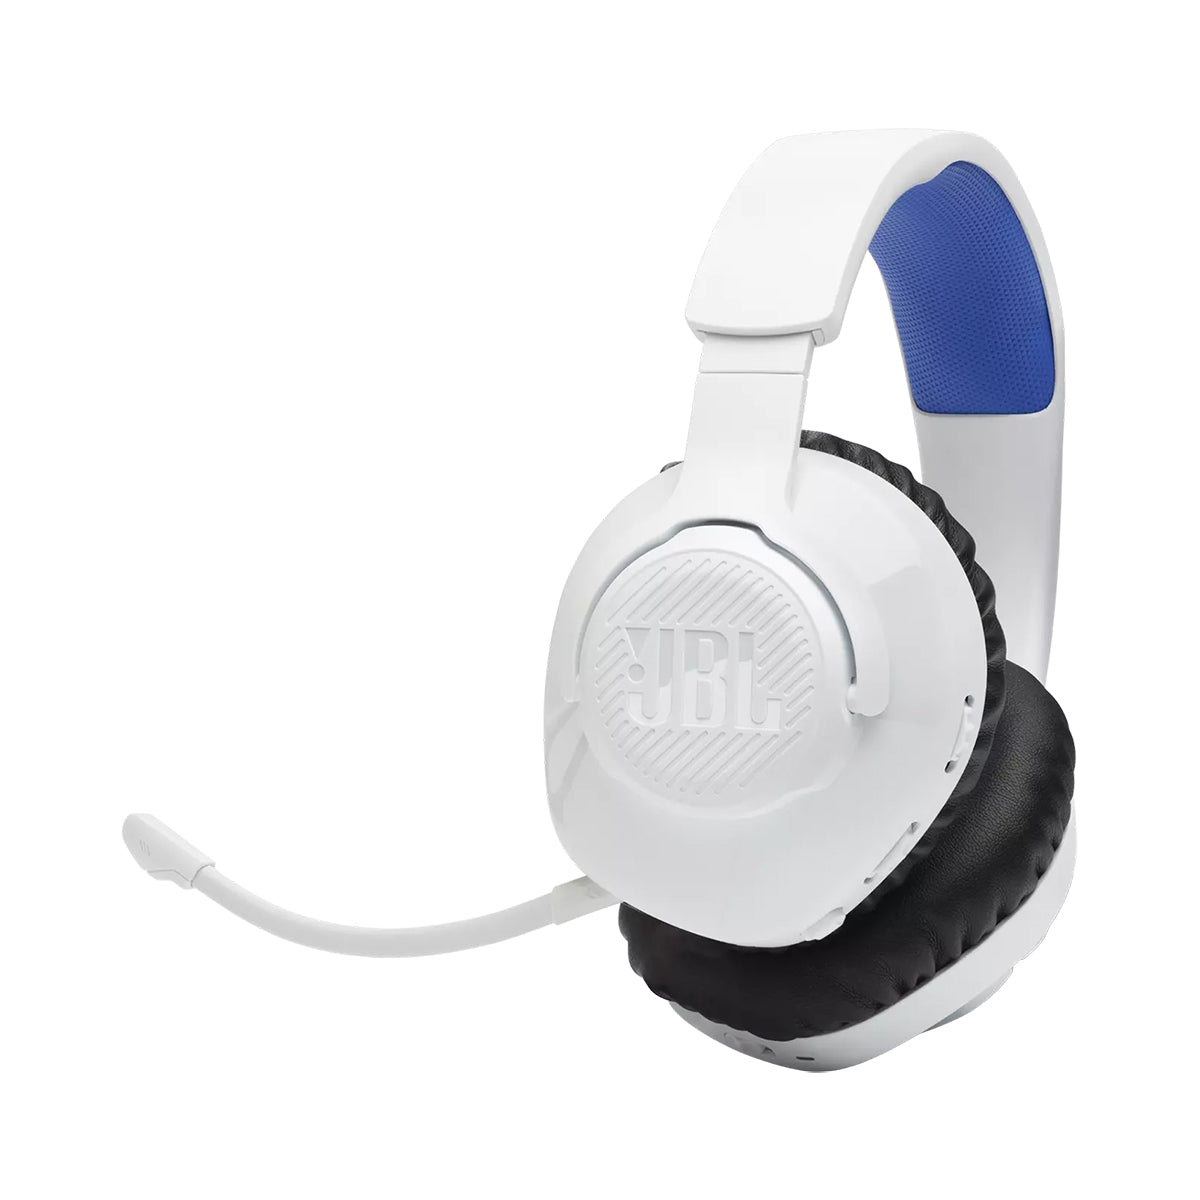  JBL Quantum 100 - Wired Over-Ear Gaming Headphones - White,  Large : Video Games